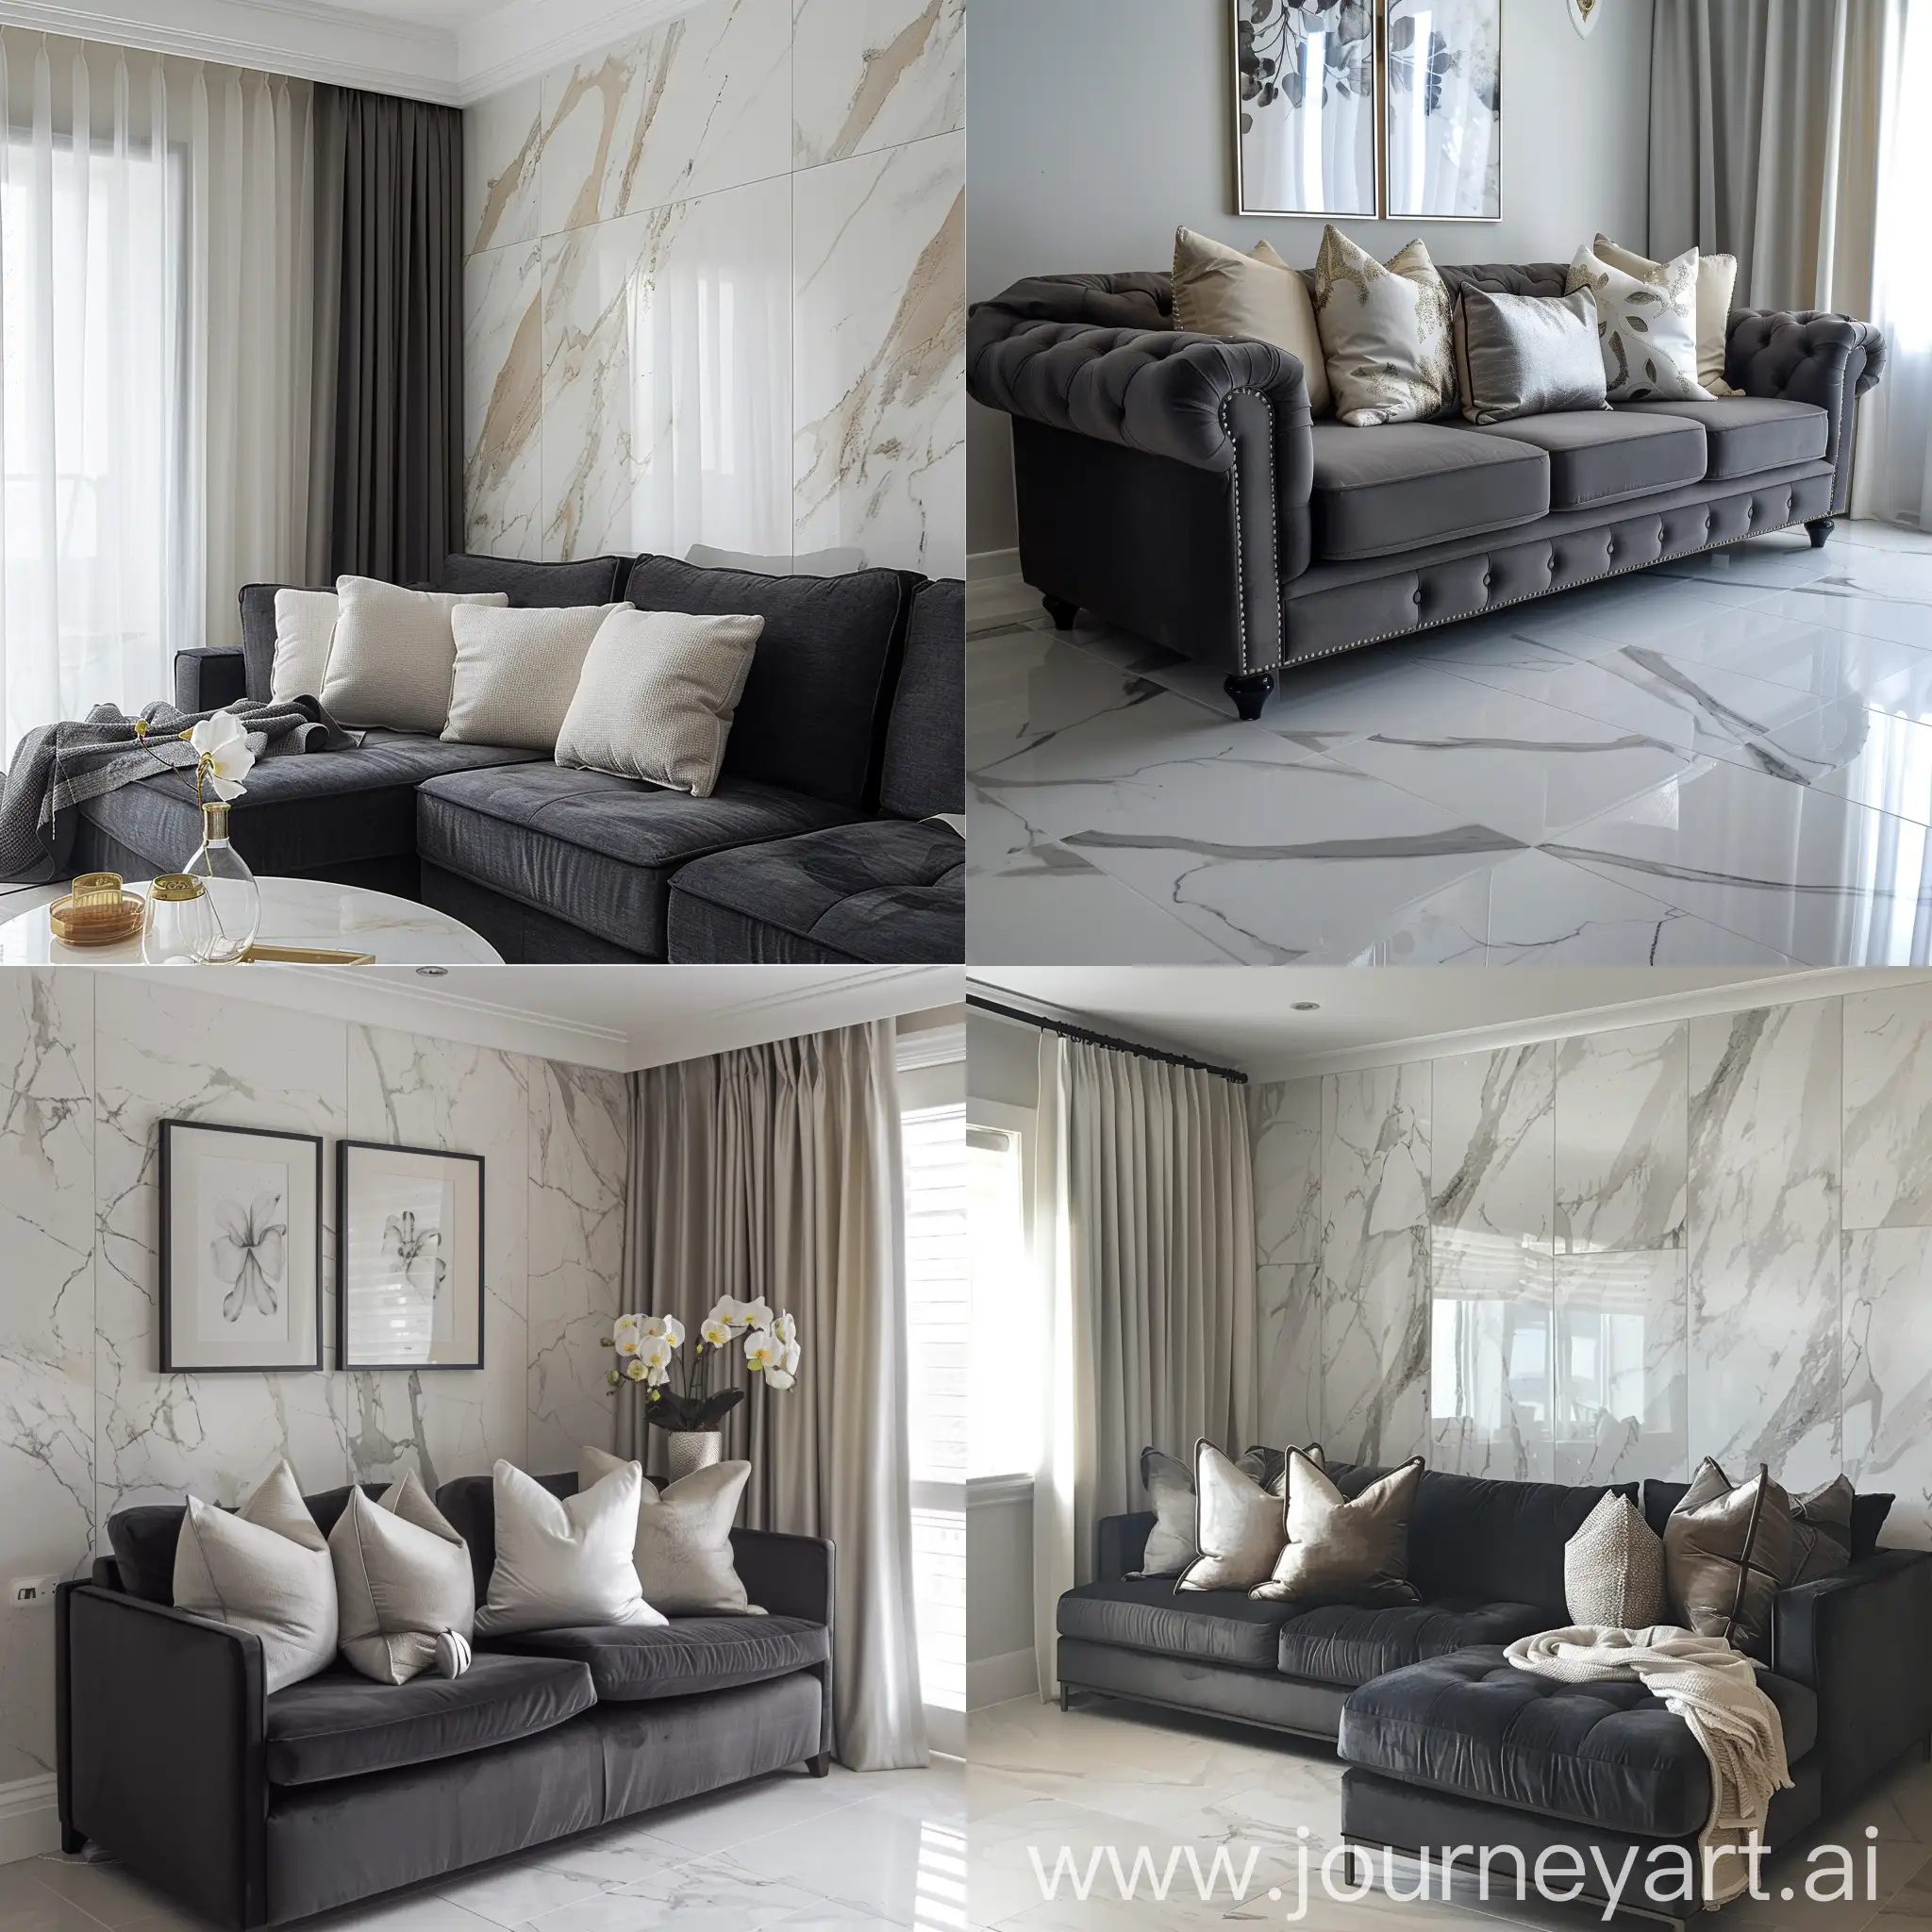 Create living room picture with dark grey sofa and cream white marble. Pick curtains of your choice that creates awesome room picture